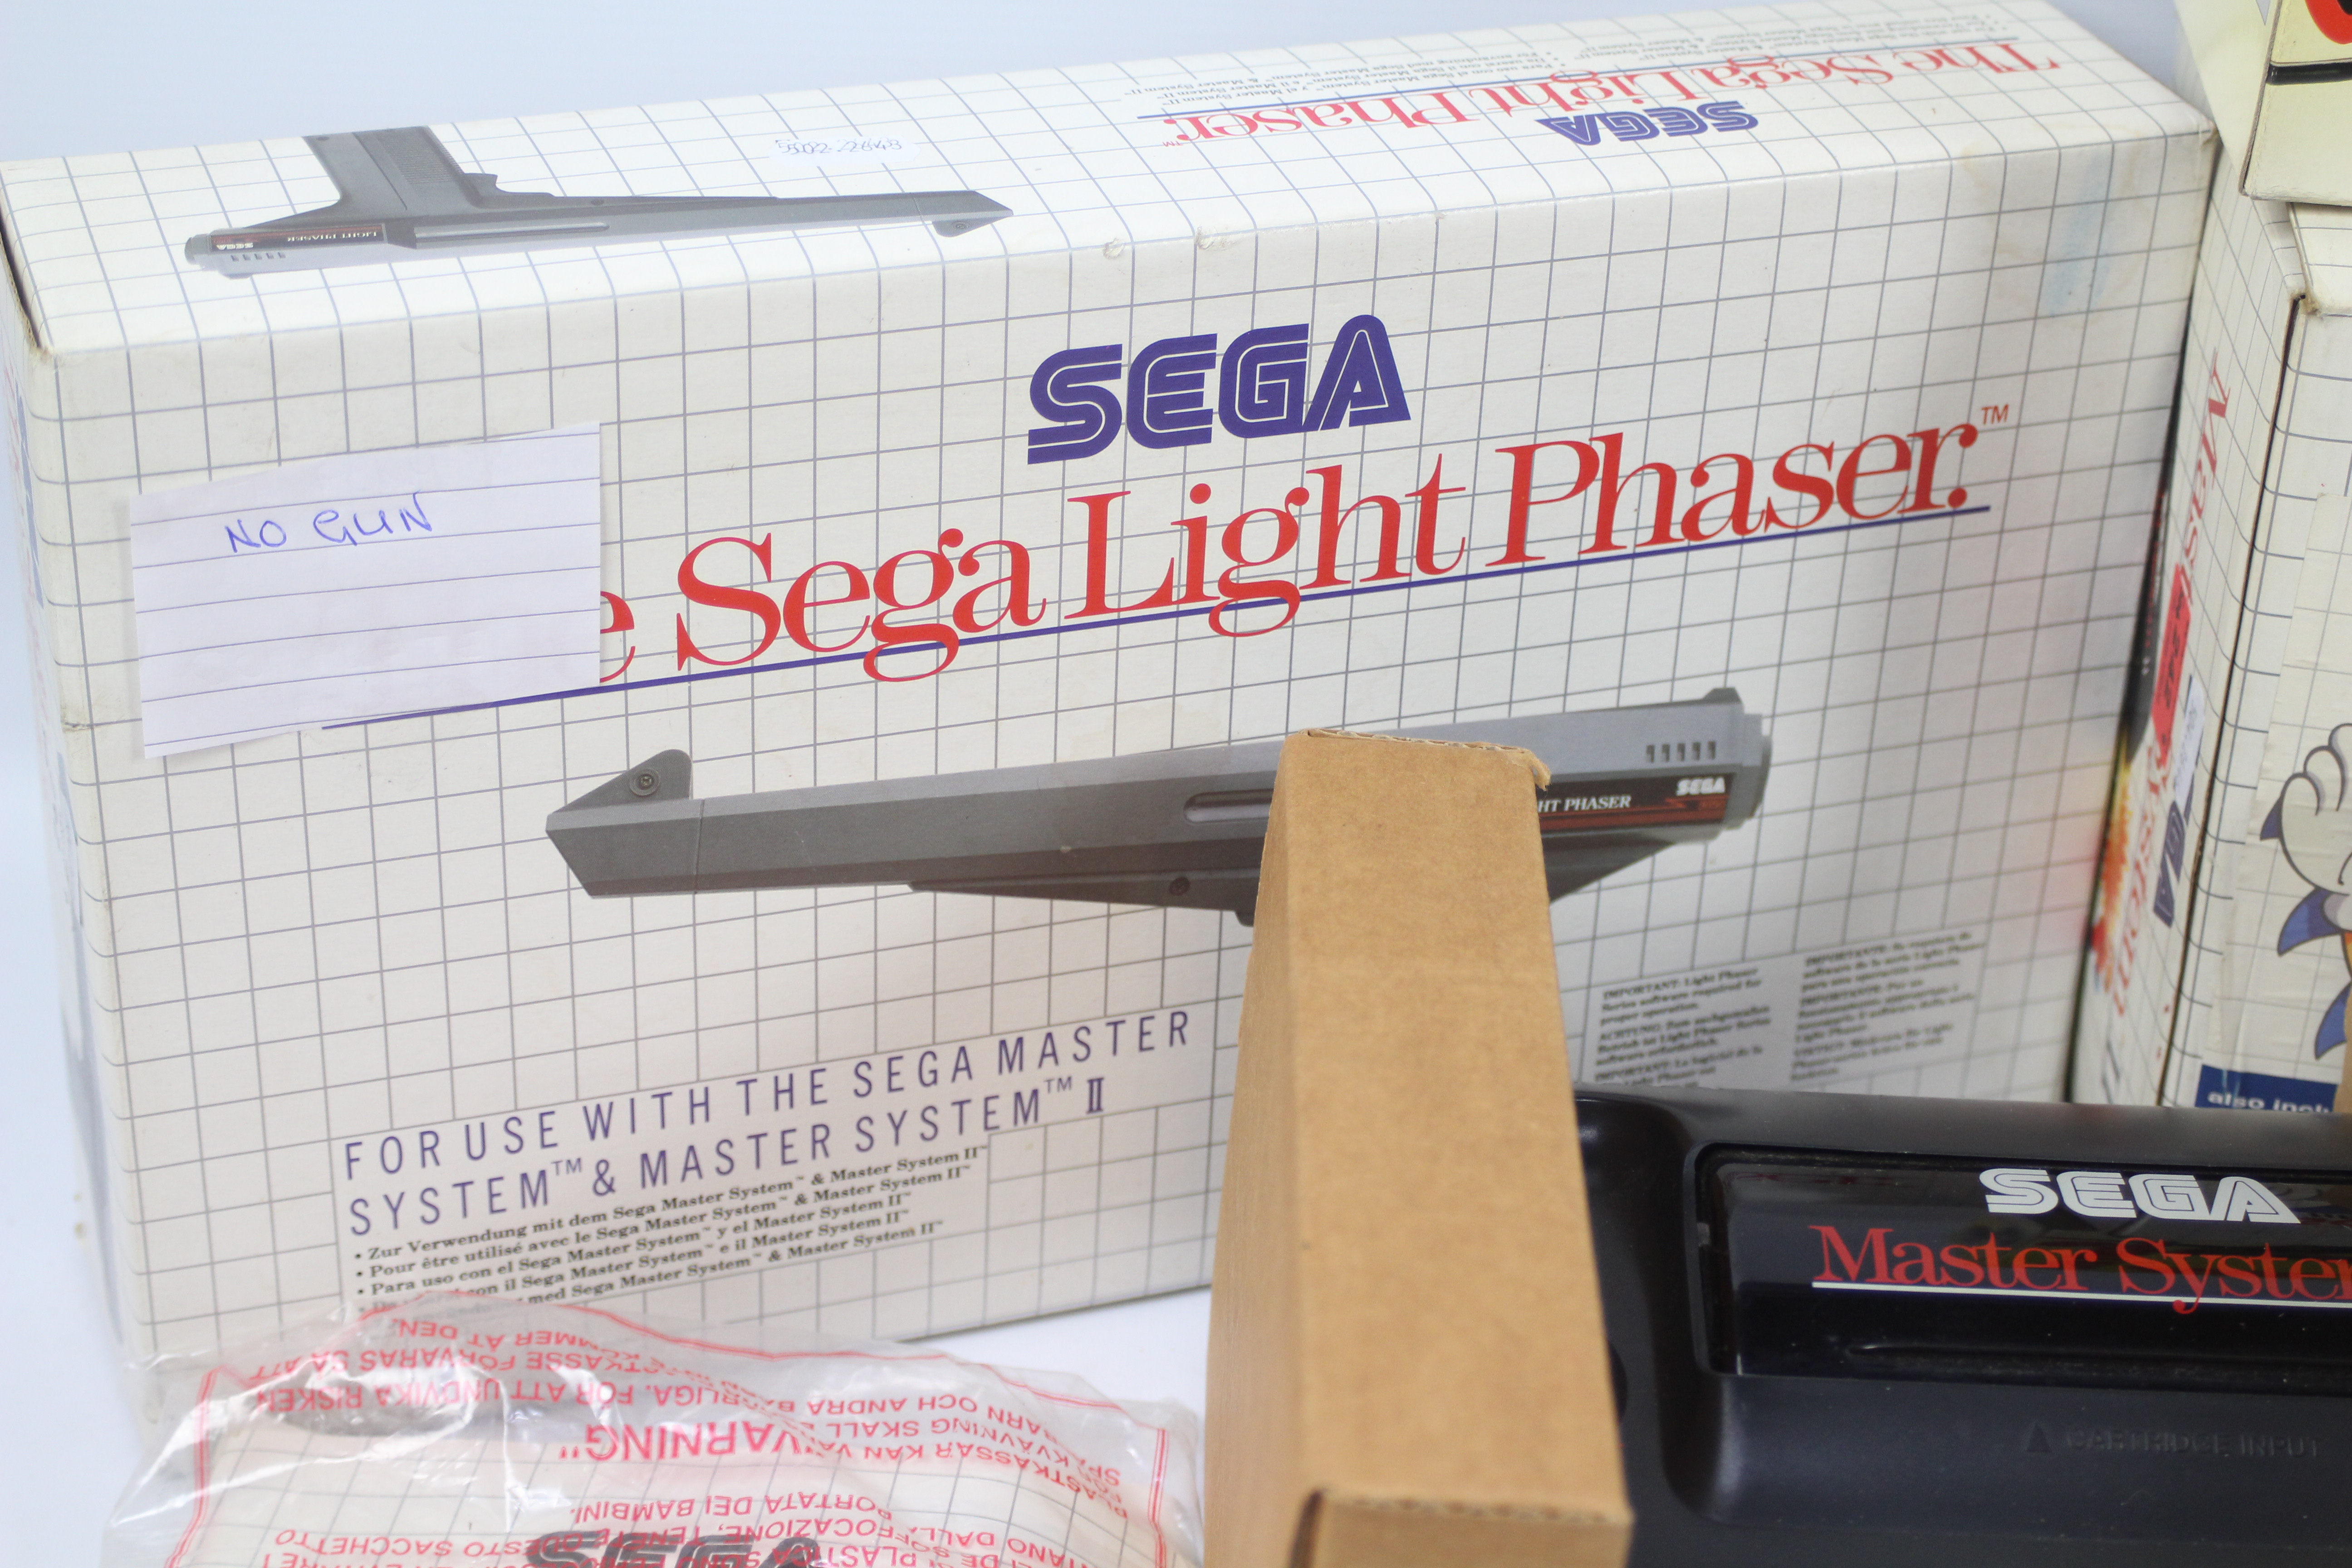 Sega Master System ii - Sega Master System ii in box with additional controller , - Image 6 of 6